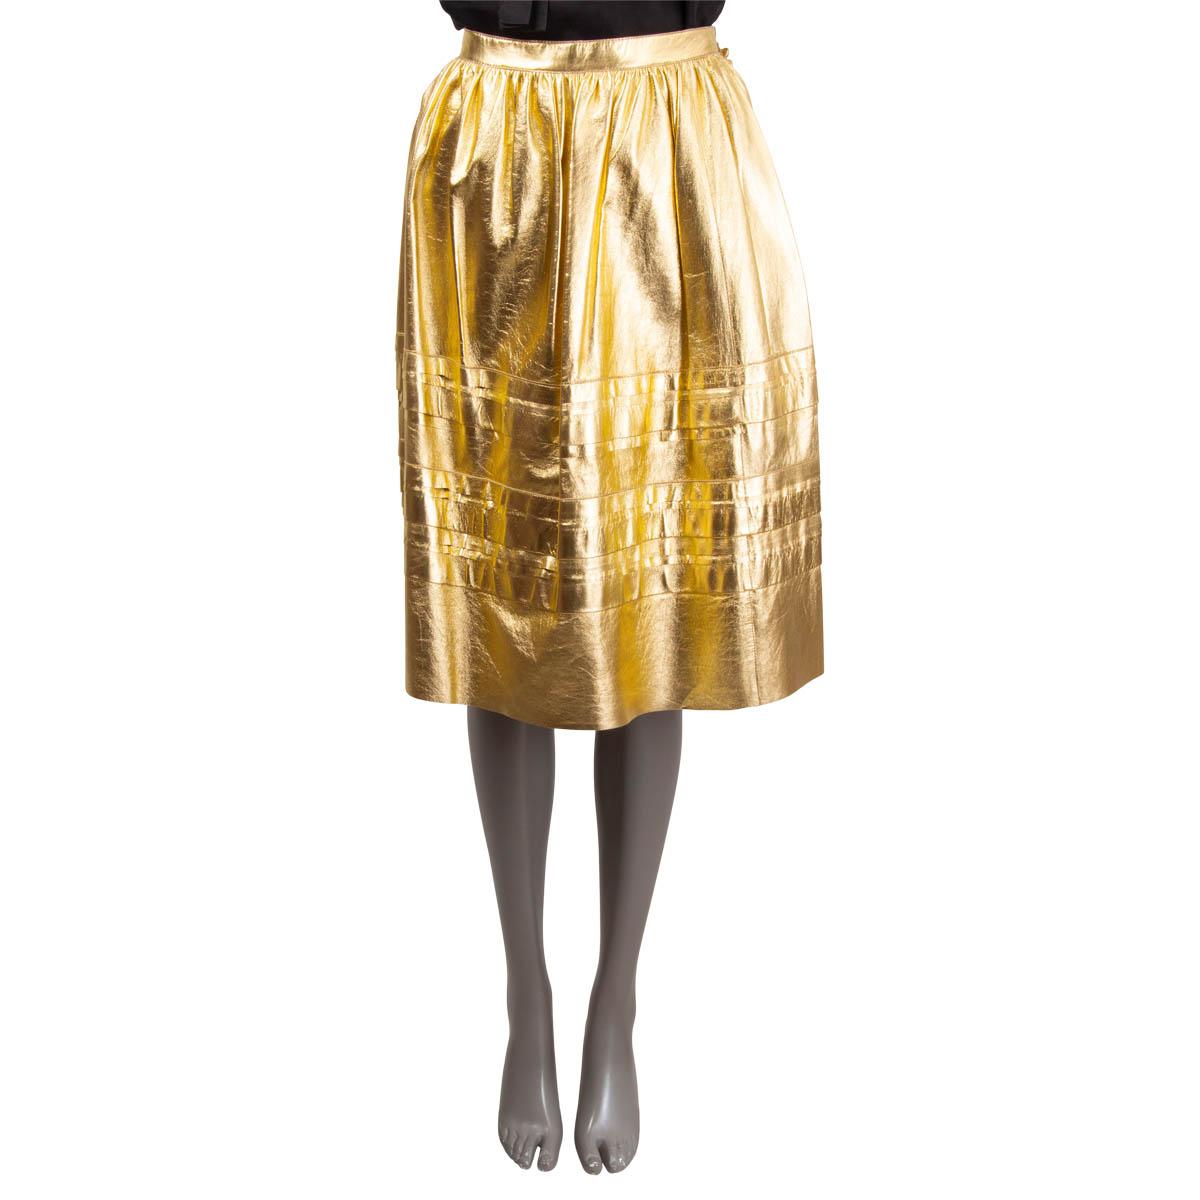 100% authentic Prada layered A-line midi skirt in golden coated leather with decorative golden buttons on the side. The design features a faux buttons line on the side. The skirt opens with hook and invisible zipper on the side. Unlined. Has been